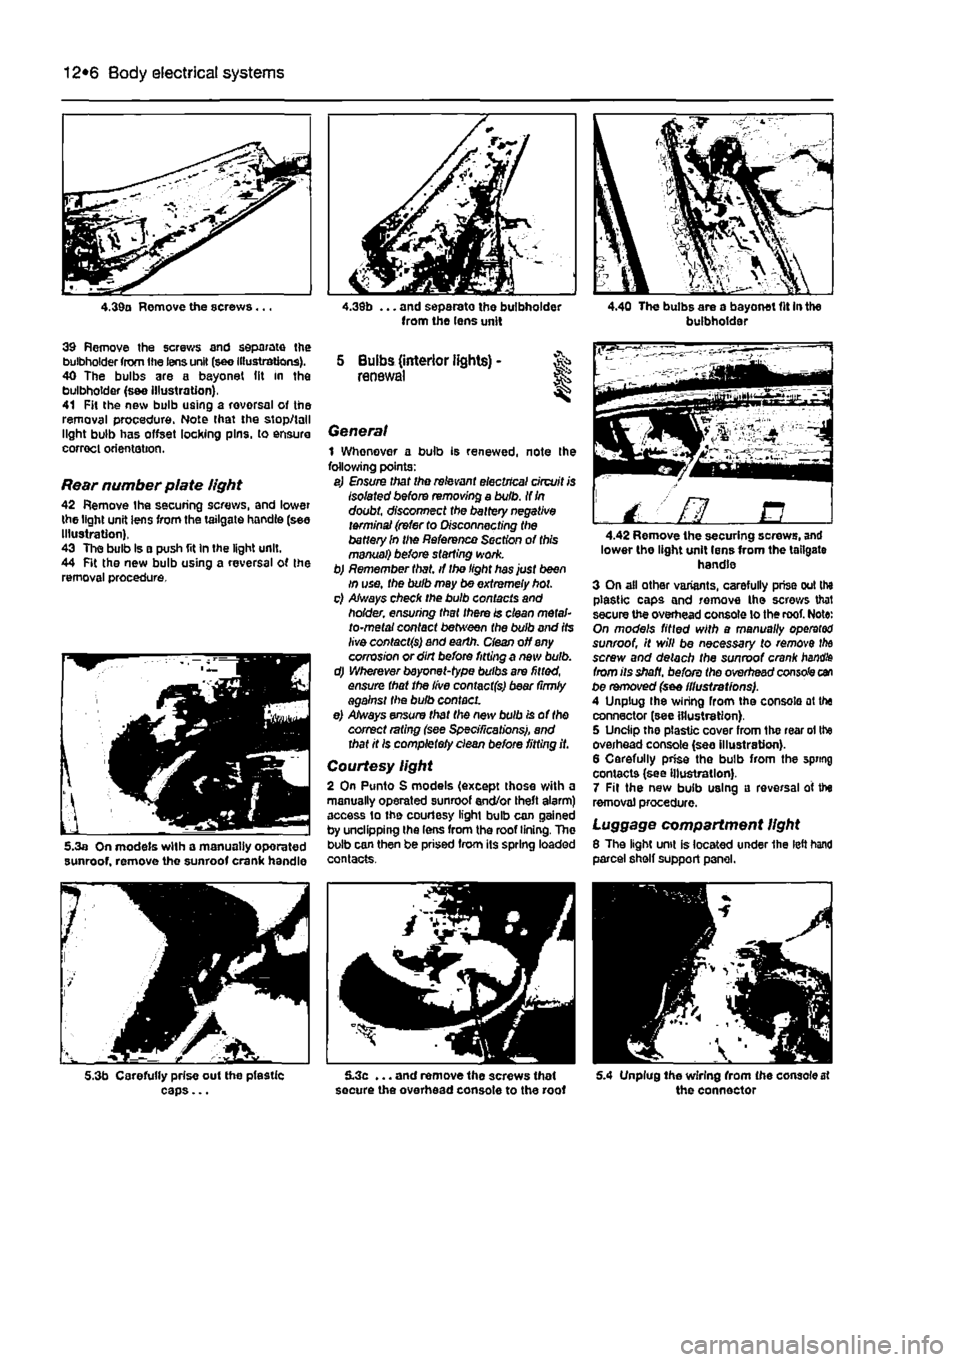 FIAT PUNTO 1995 176 / 1.G Workshop Manual 
12*6 Body electrical systems 
4.39a Remove the screws... 
39 Remove the screws and separate the bulbholder from the lens unit (see Illustrations). 40 The bulbs are a bayonet (it in the bulbholder (s&